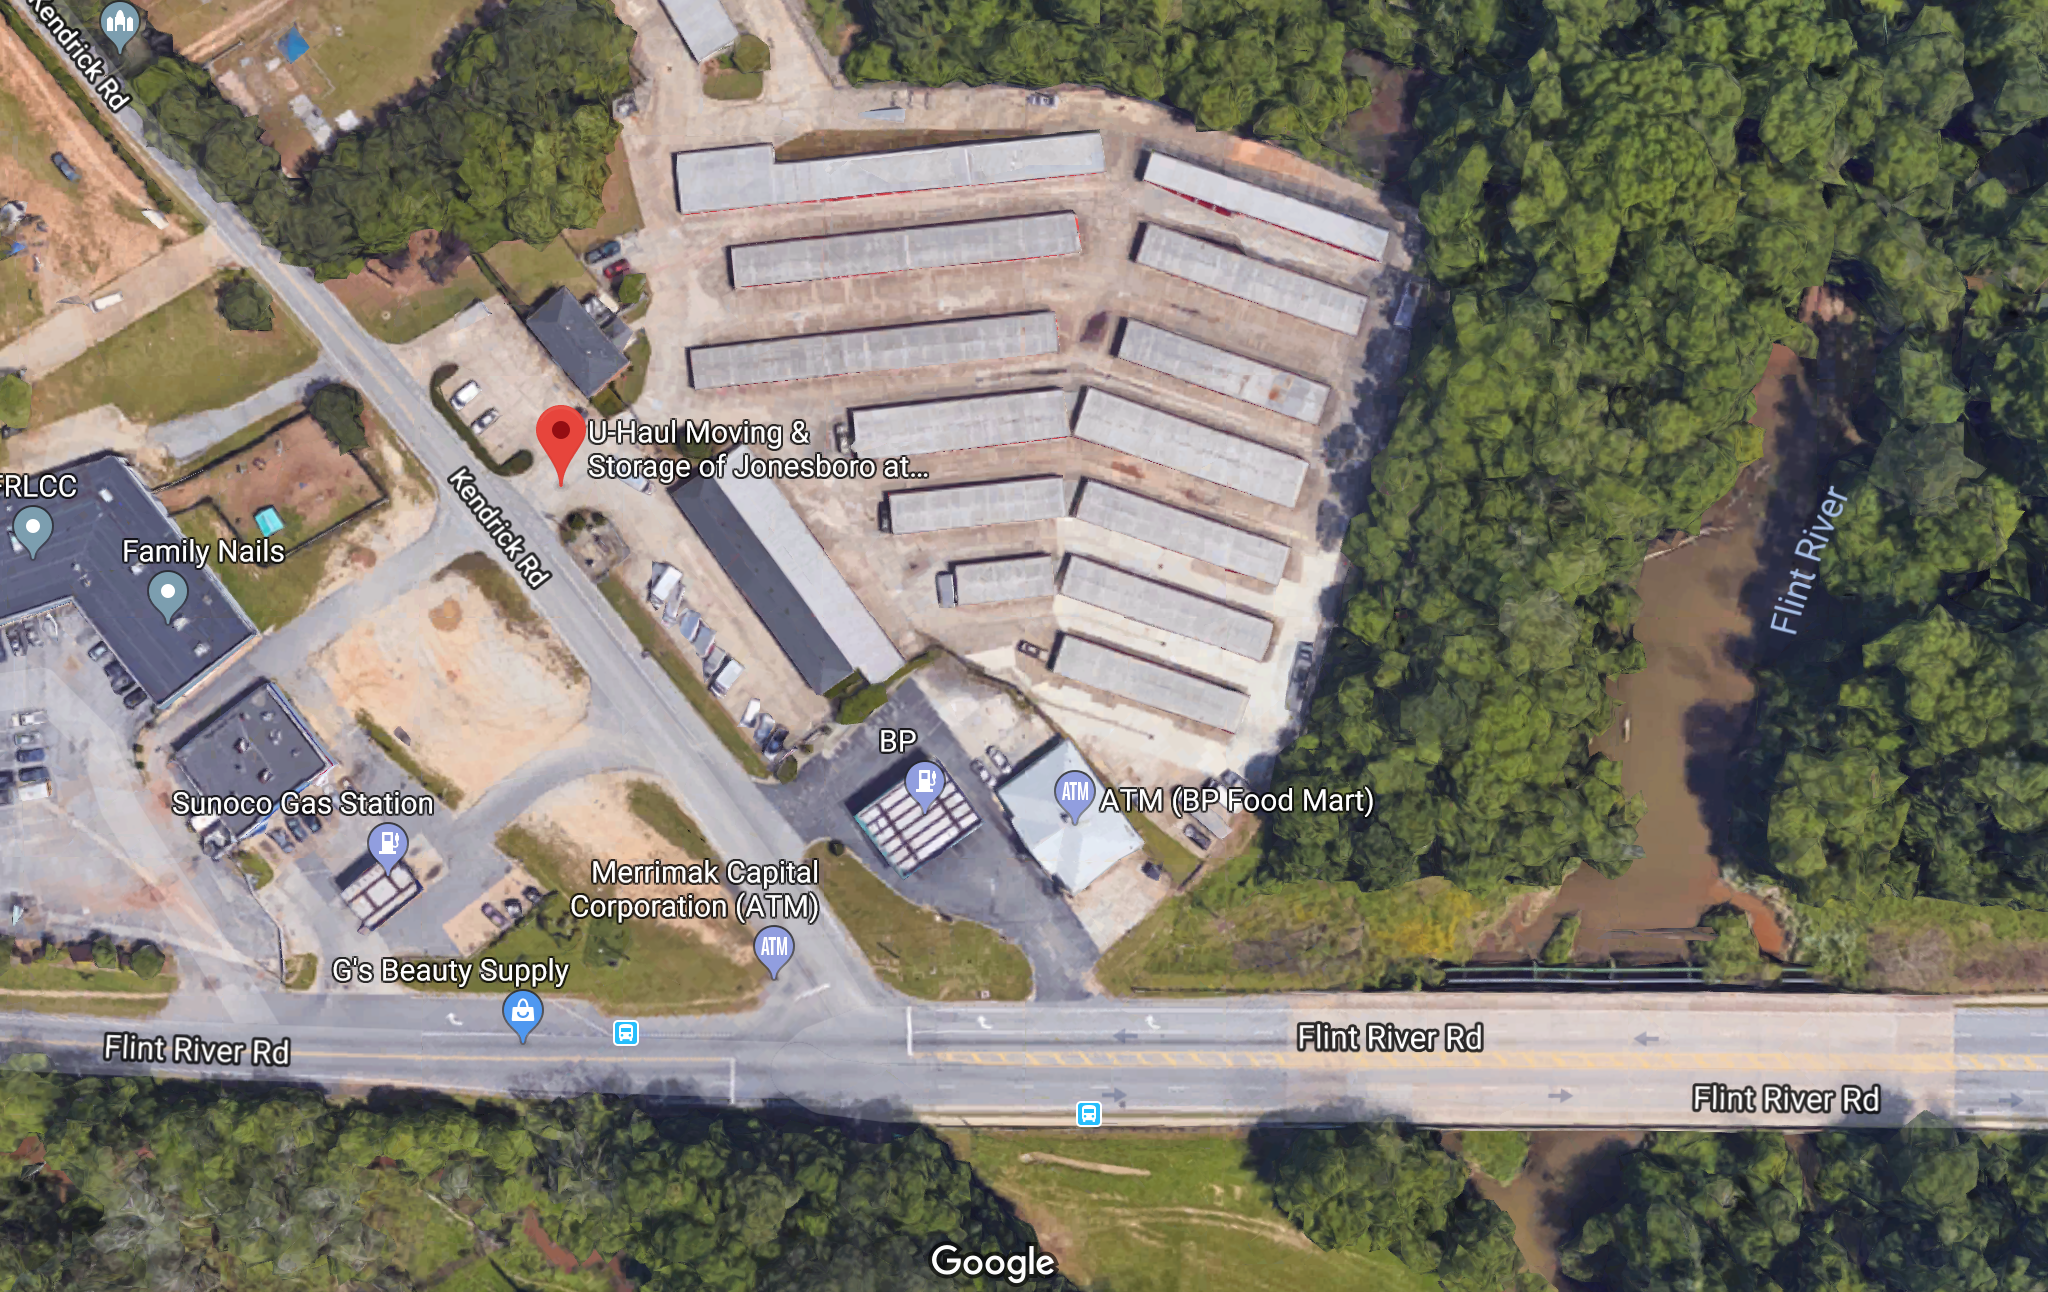 Google Maps view of the storage business